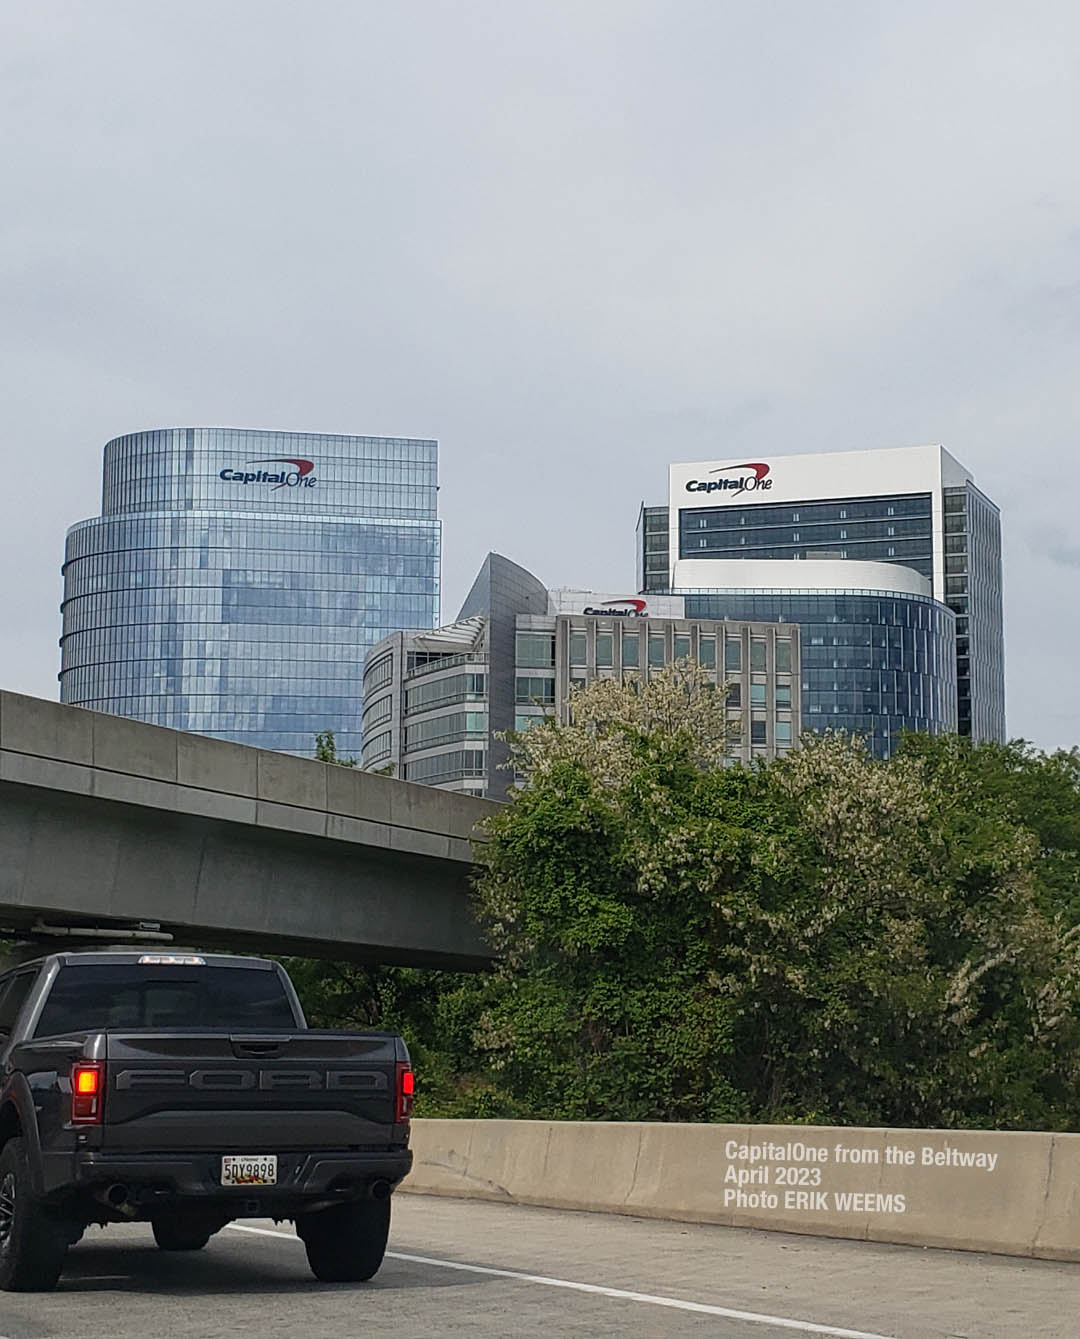 CapitalOne from the Beltway April 2023